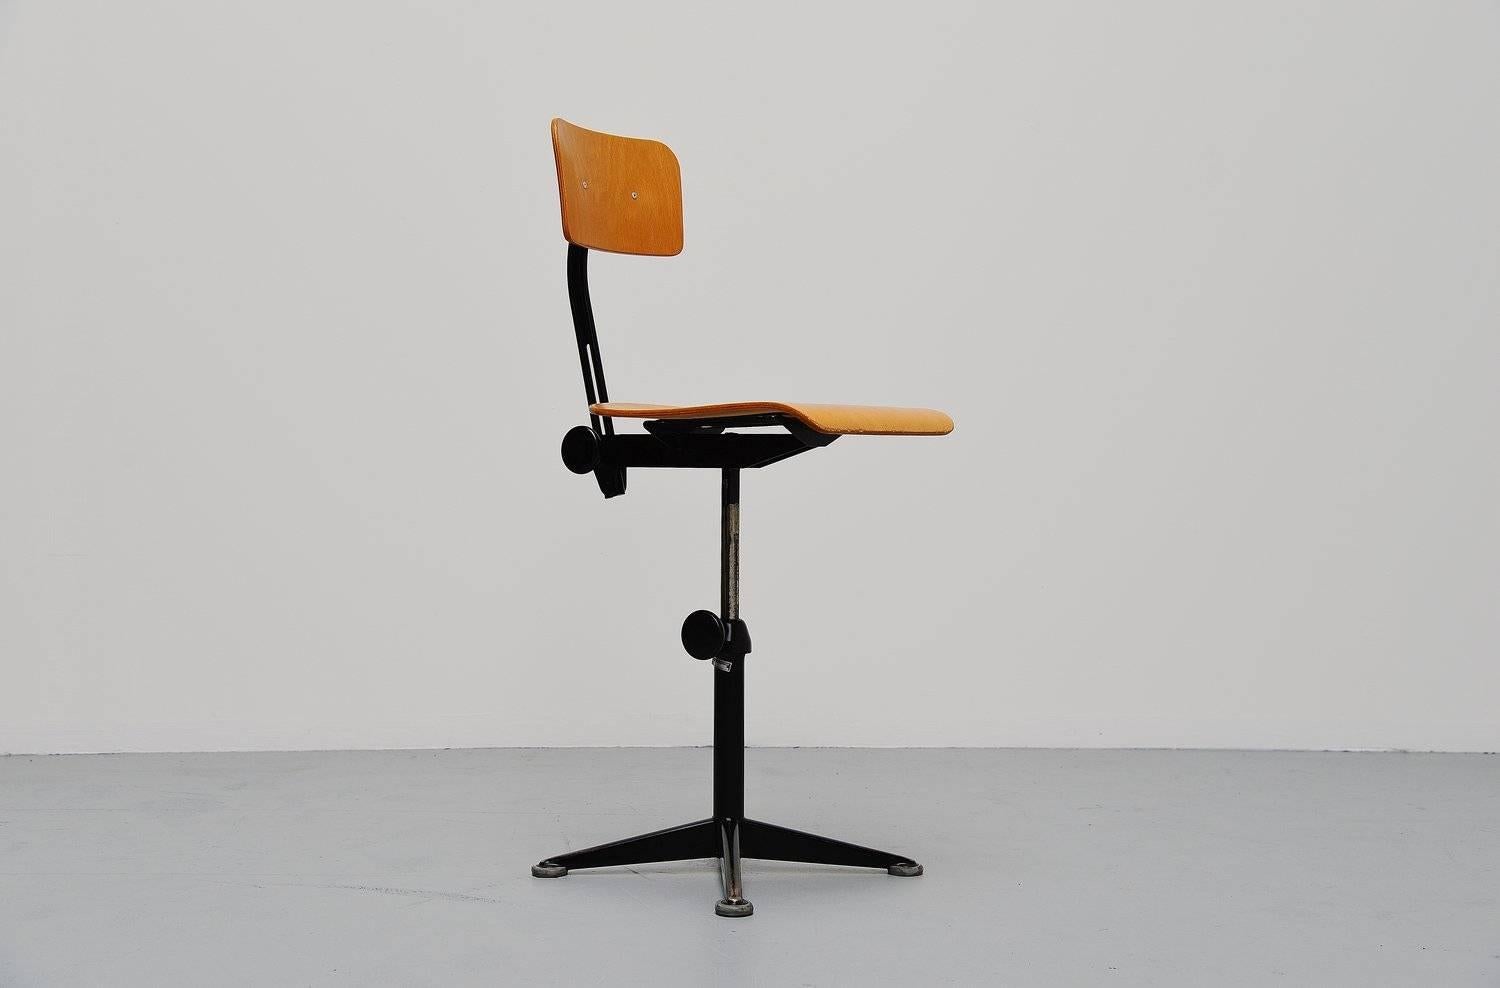 Fantastic set of drafting chairs designed by Friso Kramer for Ahrend de Cirkel, Holland, 1963. These chairs have rare and original black lacquered base and birch plywood seat and back. The seating height is adjustable and the back rest height is